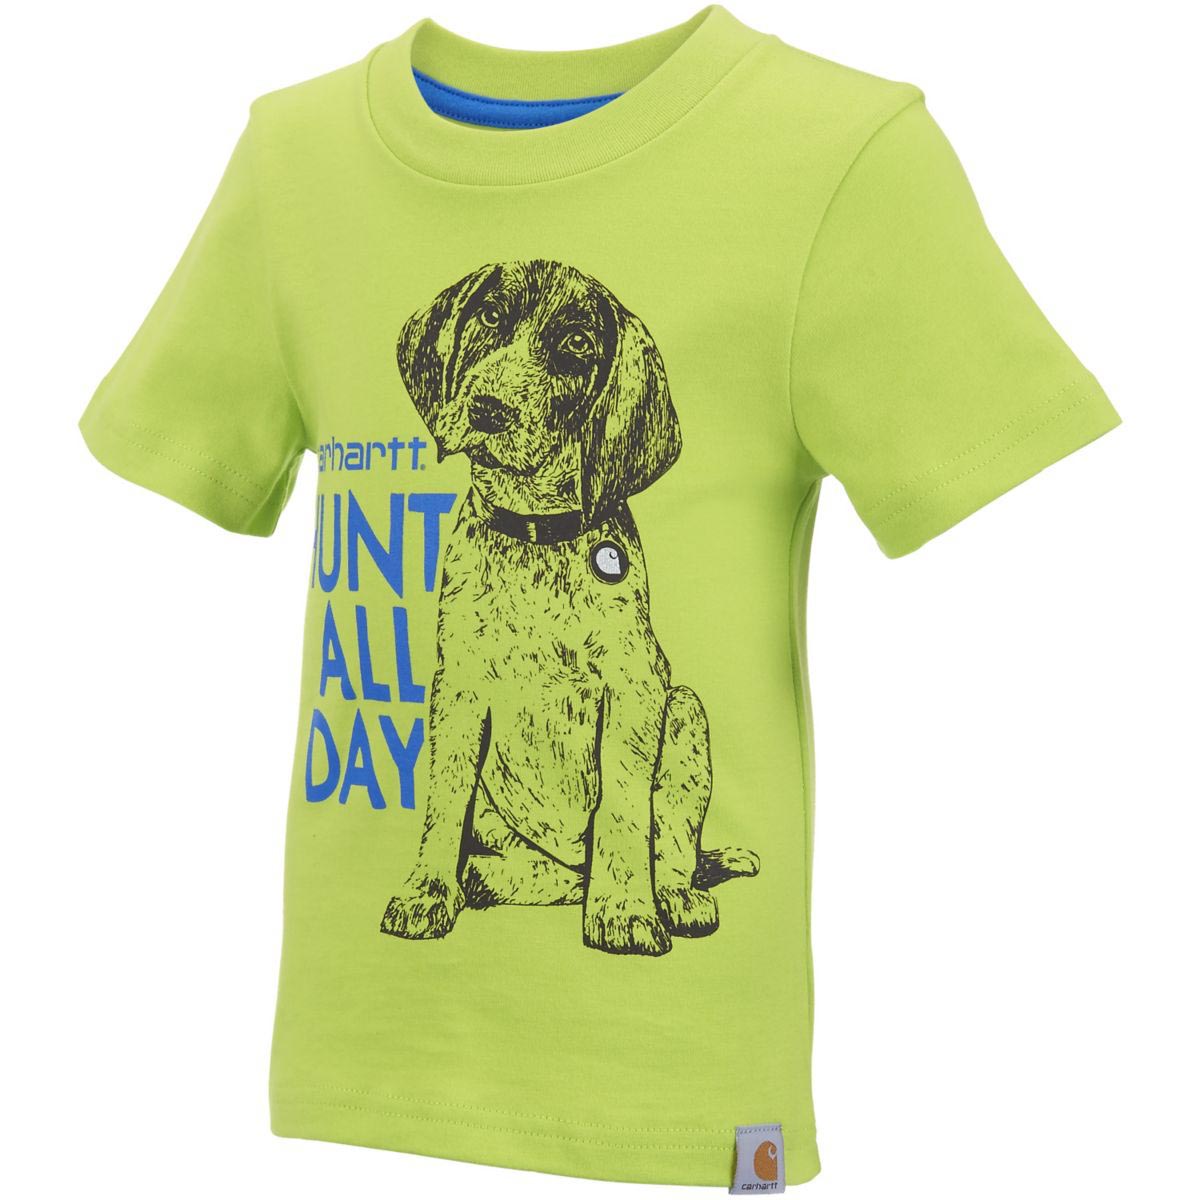 Carhartt Infant and Toddler Boys' Hunt All Day Tee